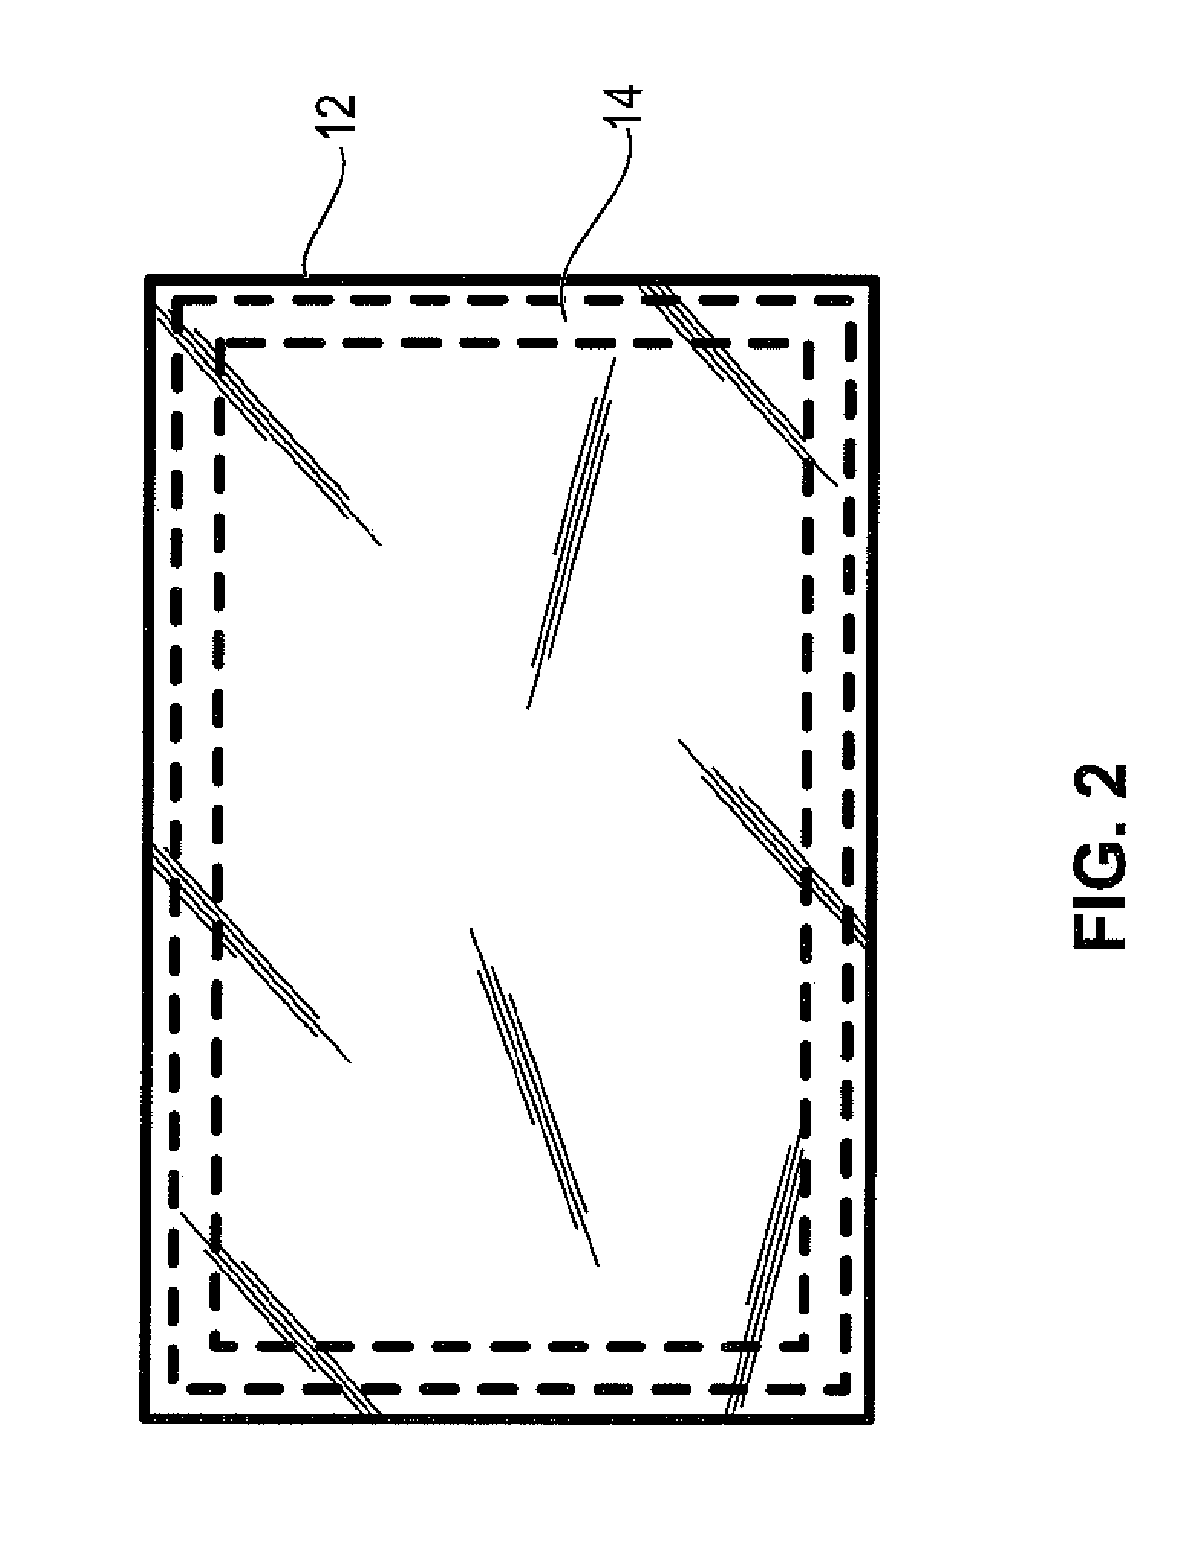 Method for filling at least one thin-walled transport container with at least one valuable object and device for safekeeping at least one valuable object